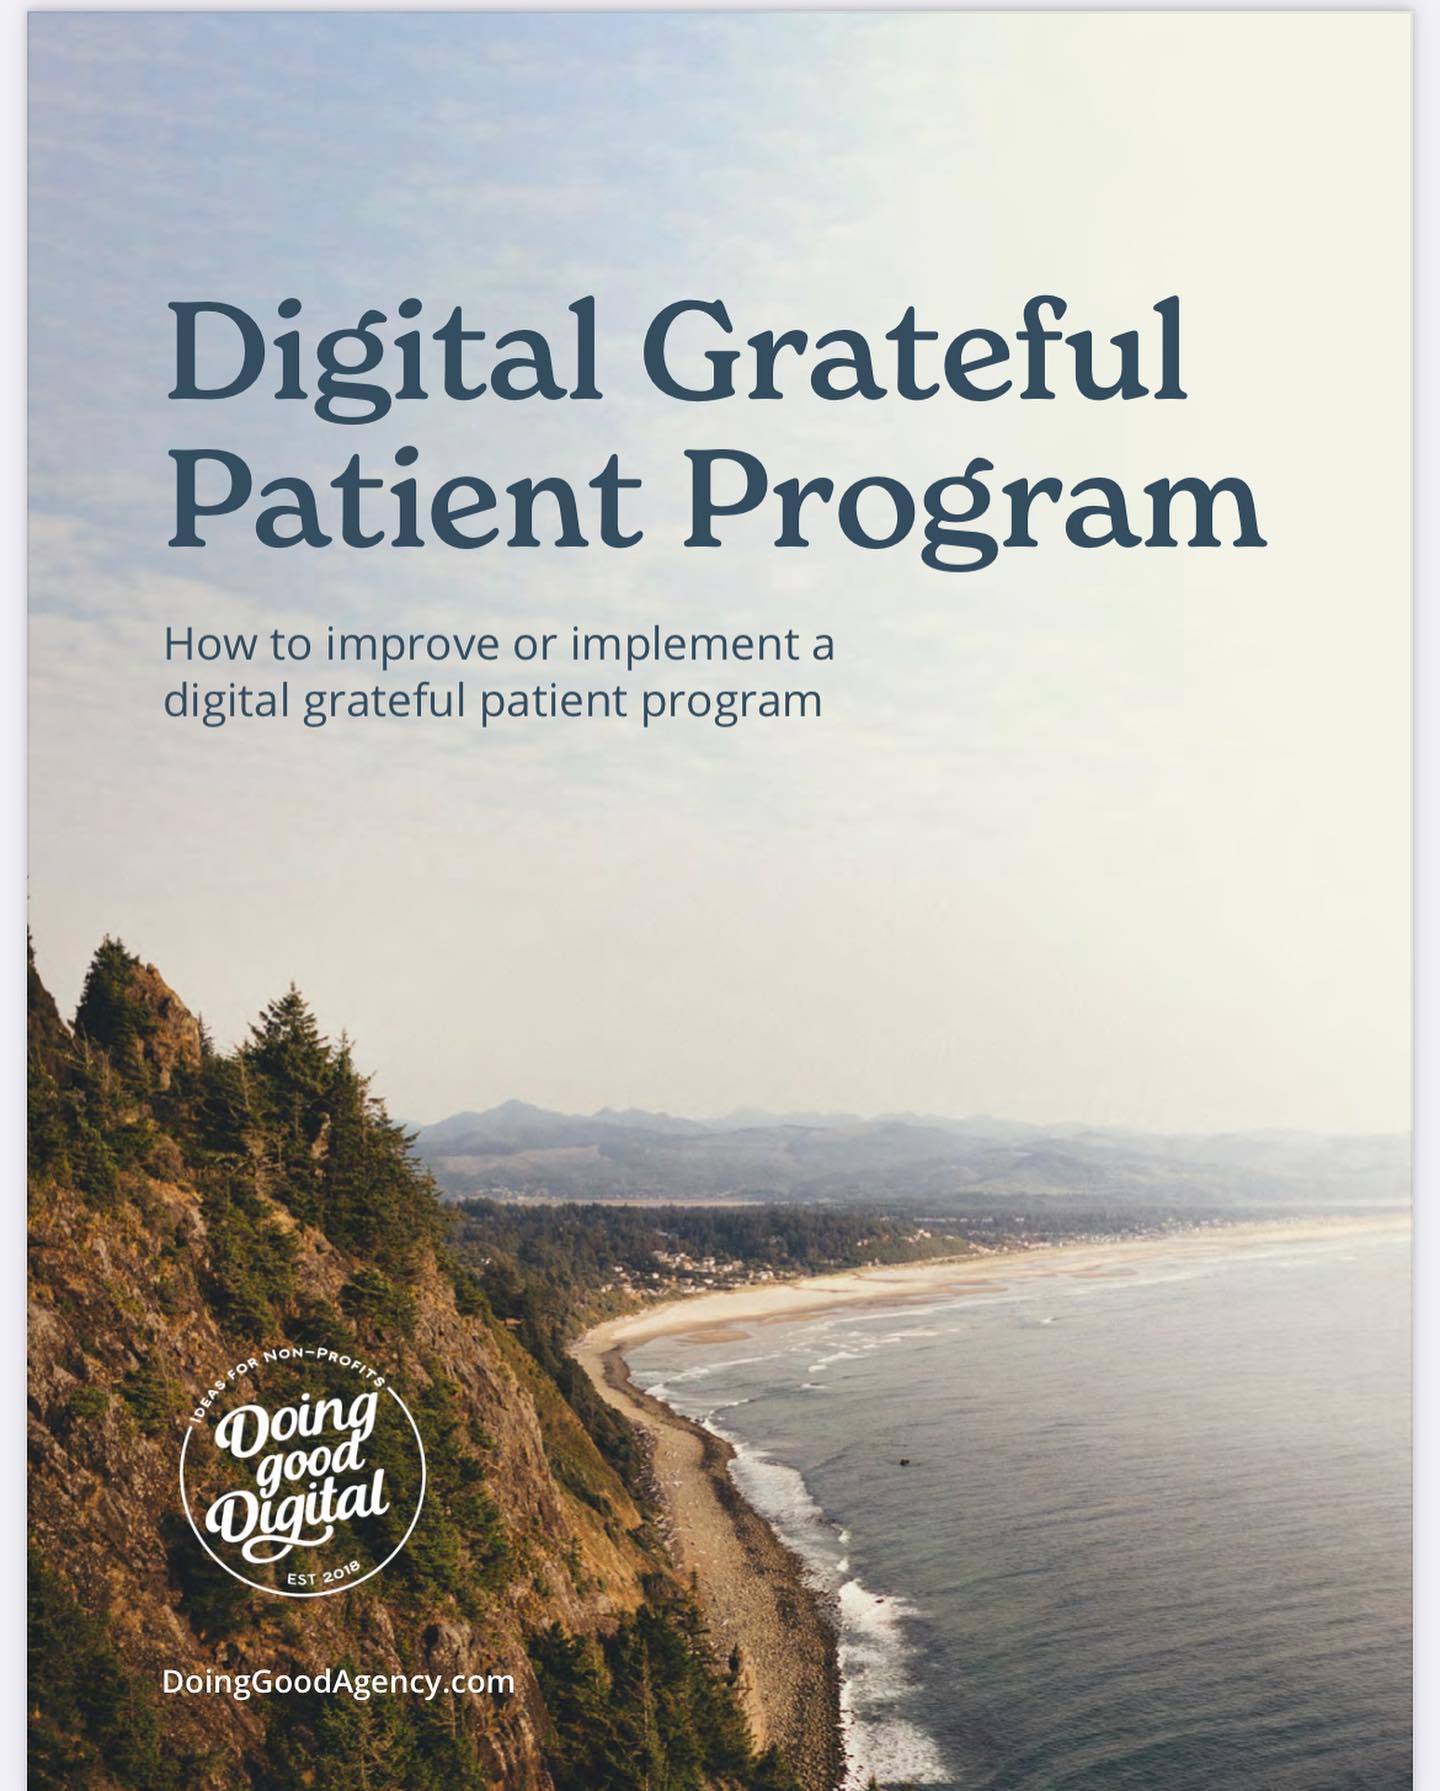 Our 2022 Digital Grateful Patient Report is here! Enhance your current healthcare grateful patient program through email, or use our strategy to develop a new digital-only program. Download your free copy of our newest report via our link in bio.